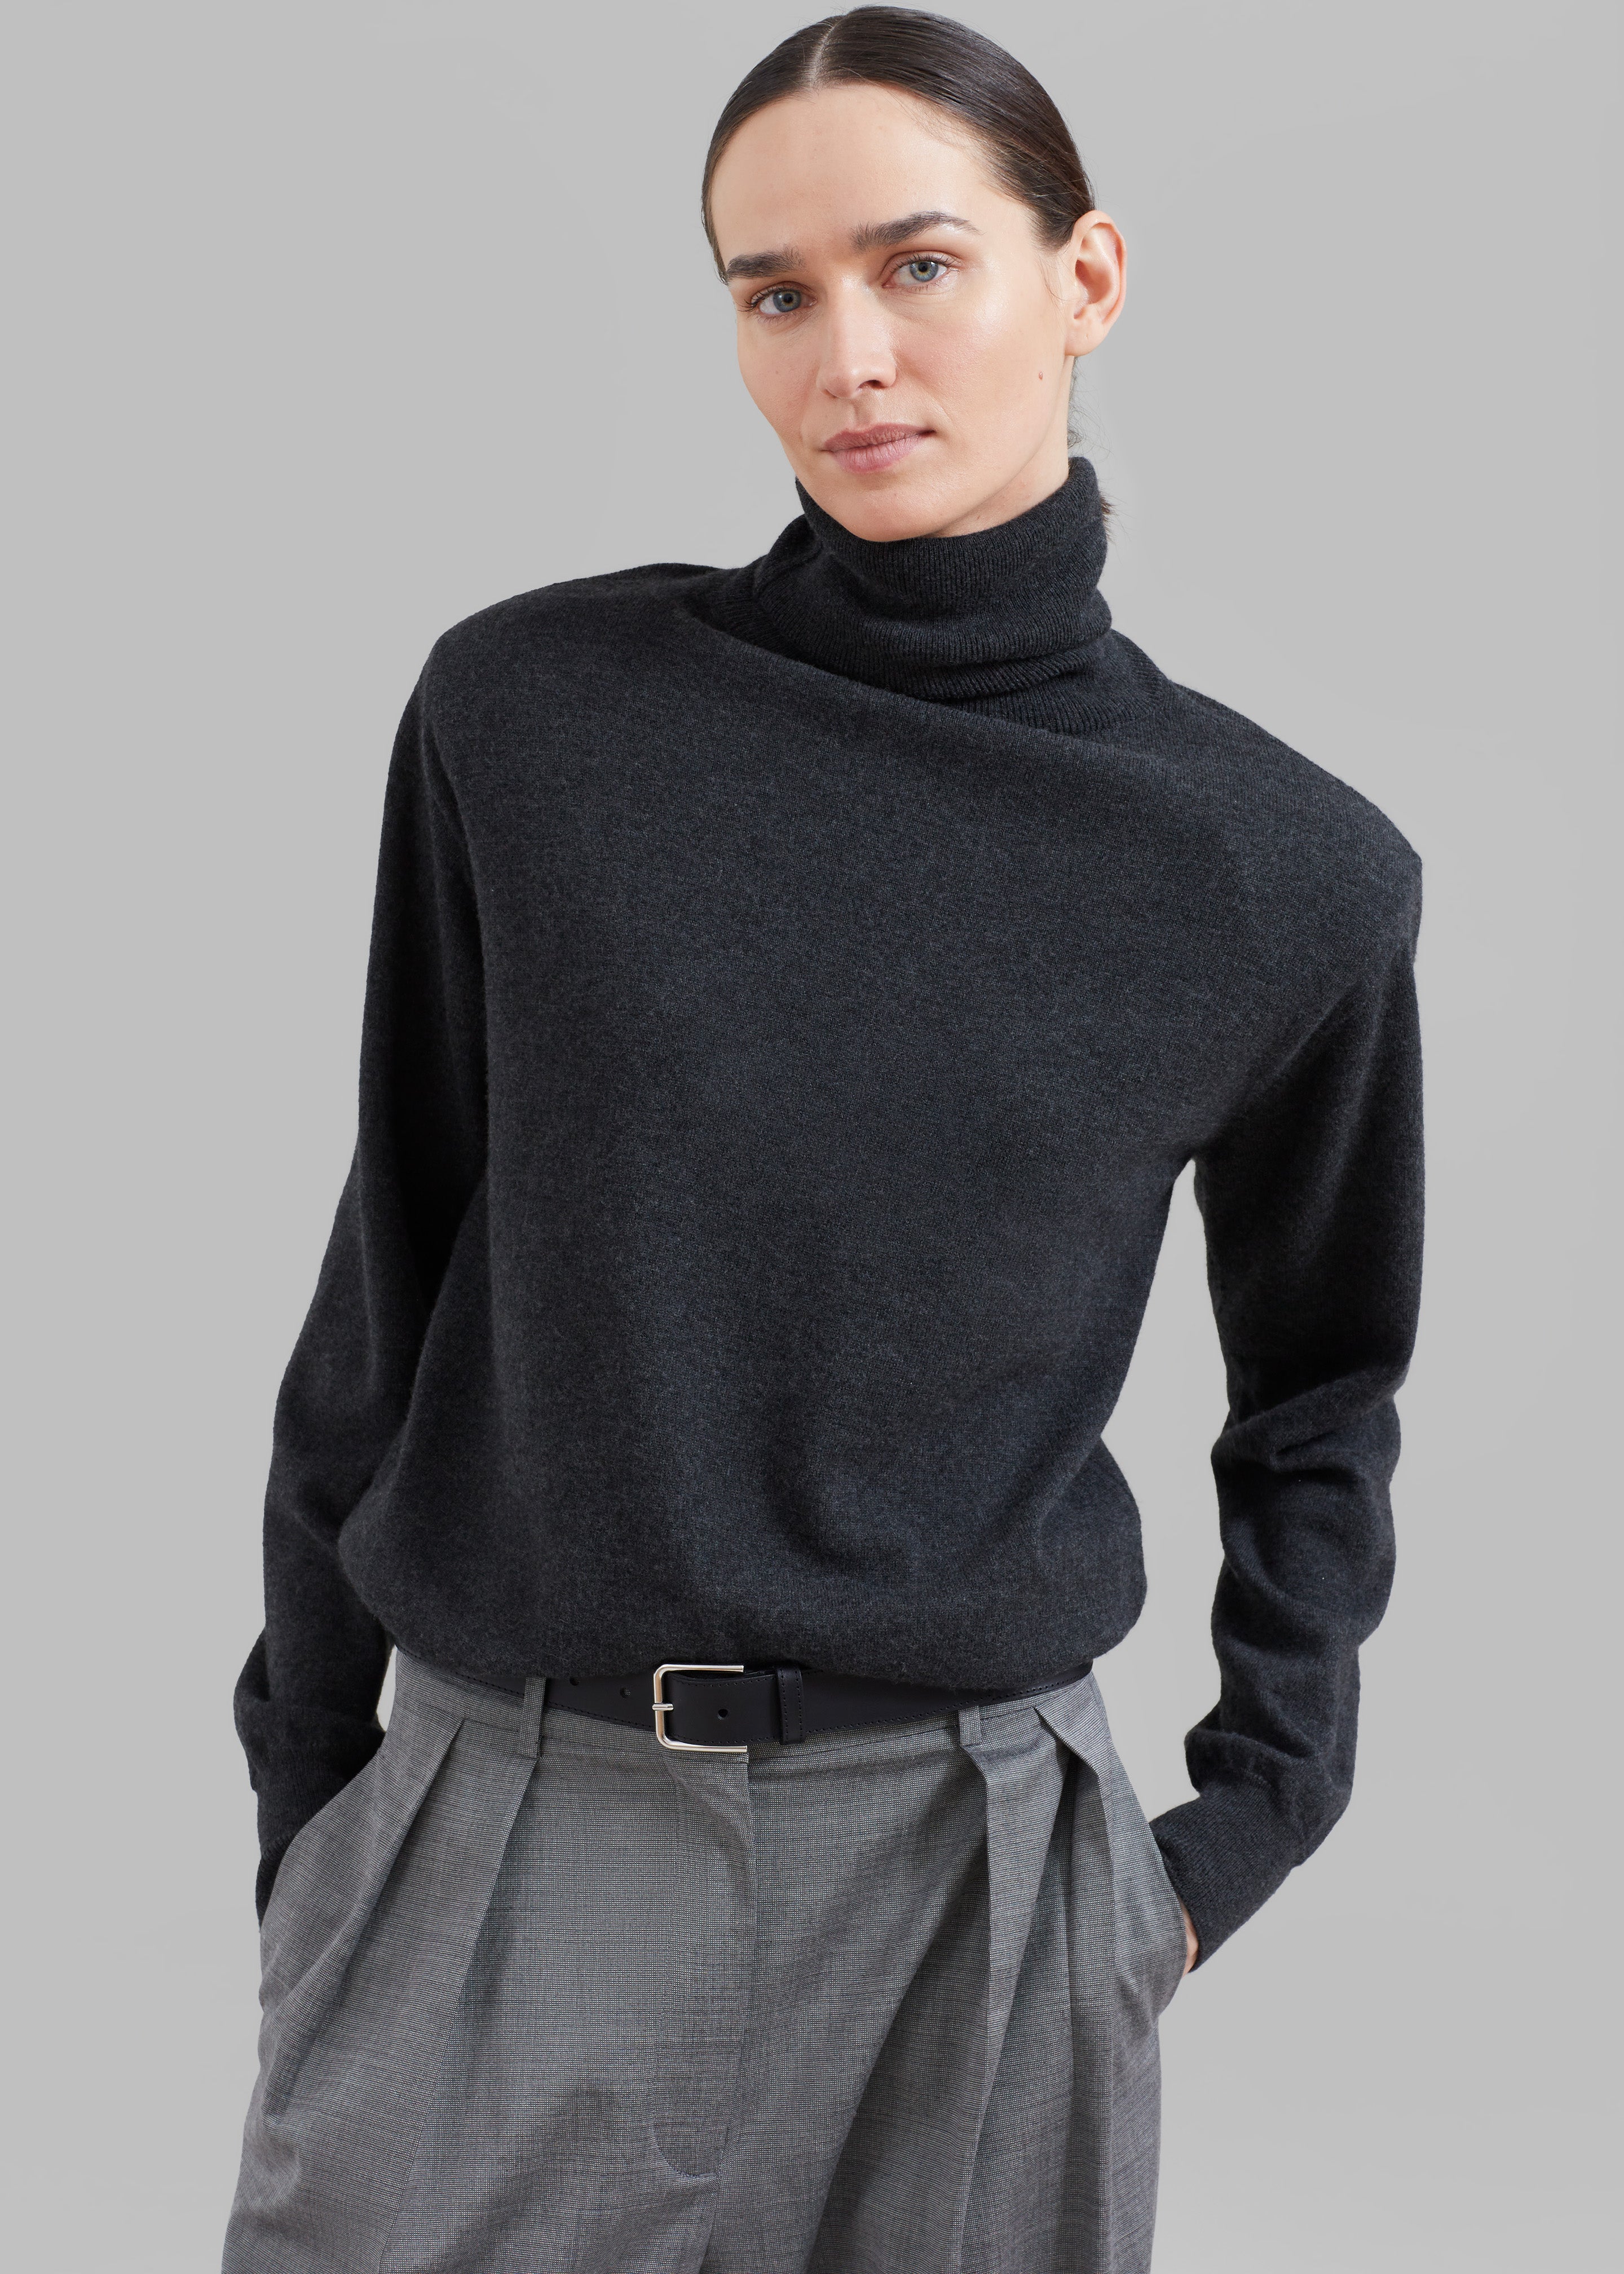 Ines Thin Padded Turtleneck - Charcoal - 1